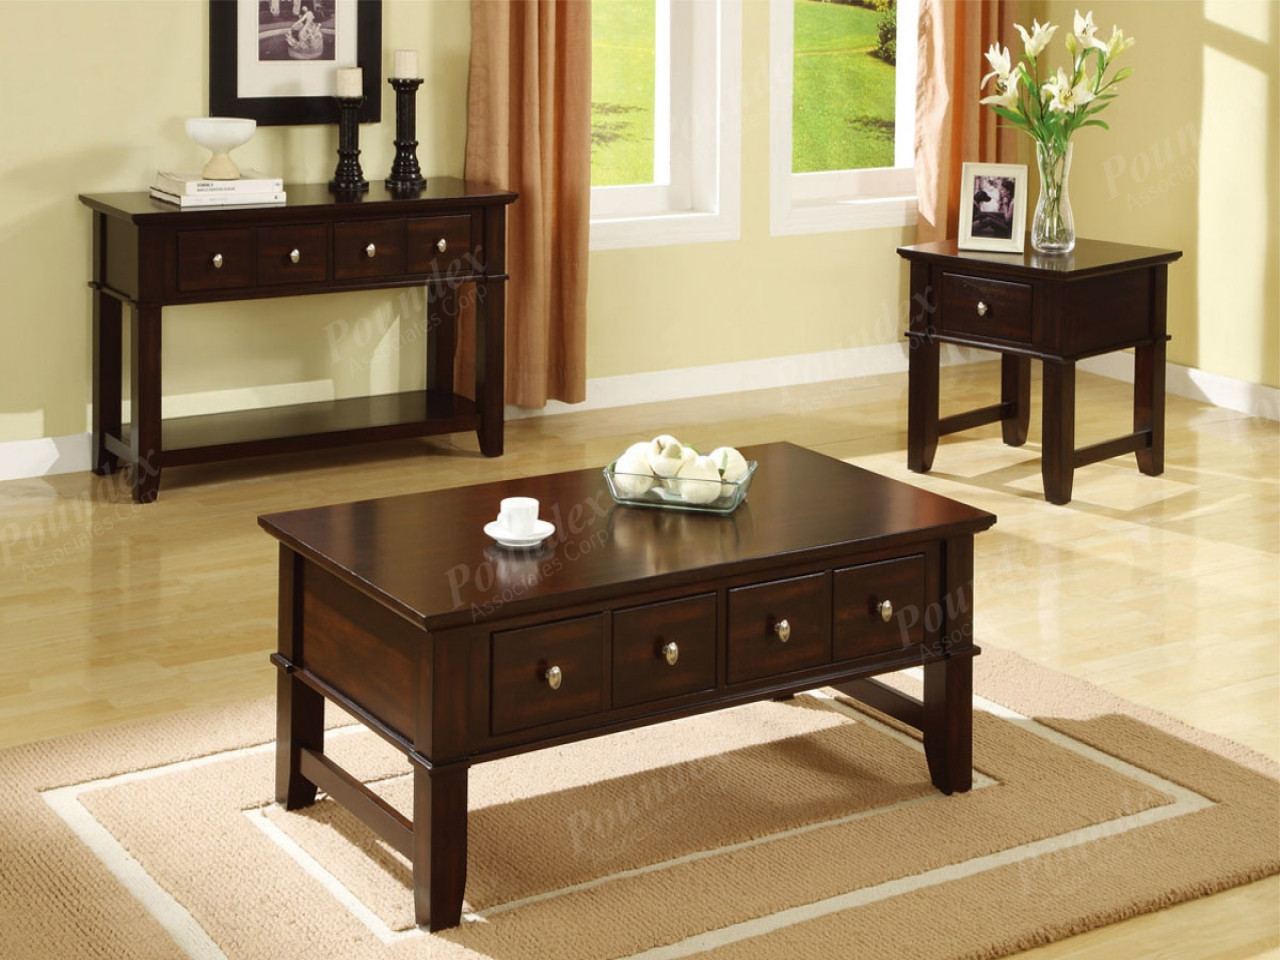 Living Room Coffee Table Sets
 Round coffee tables with drawers ashley living room table